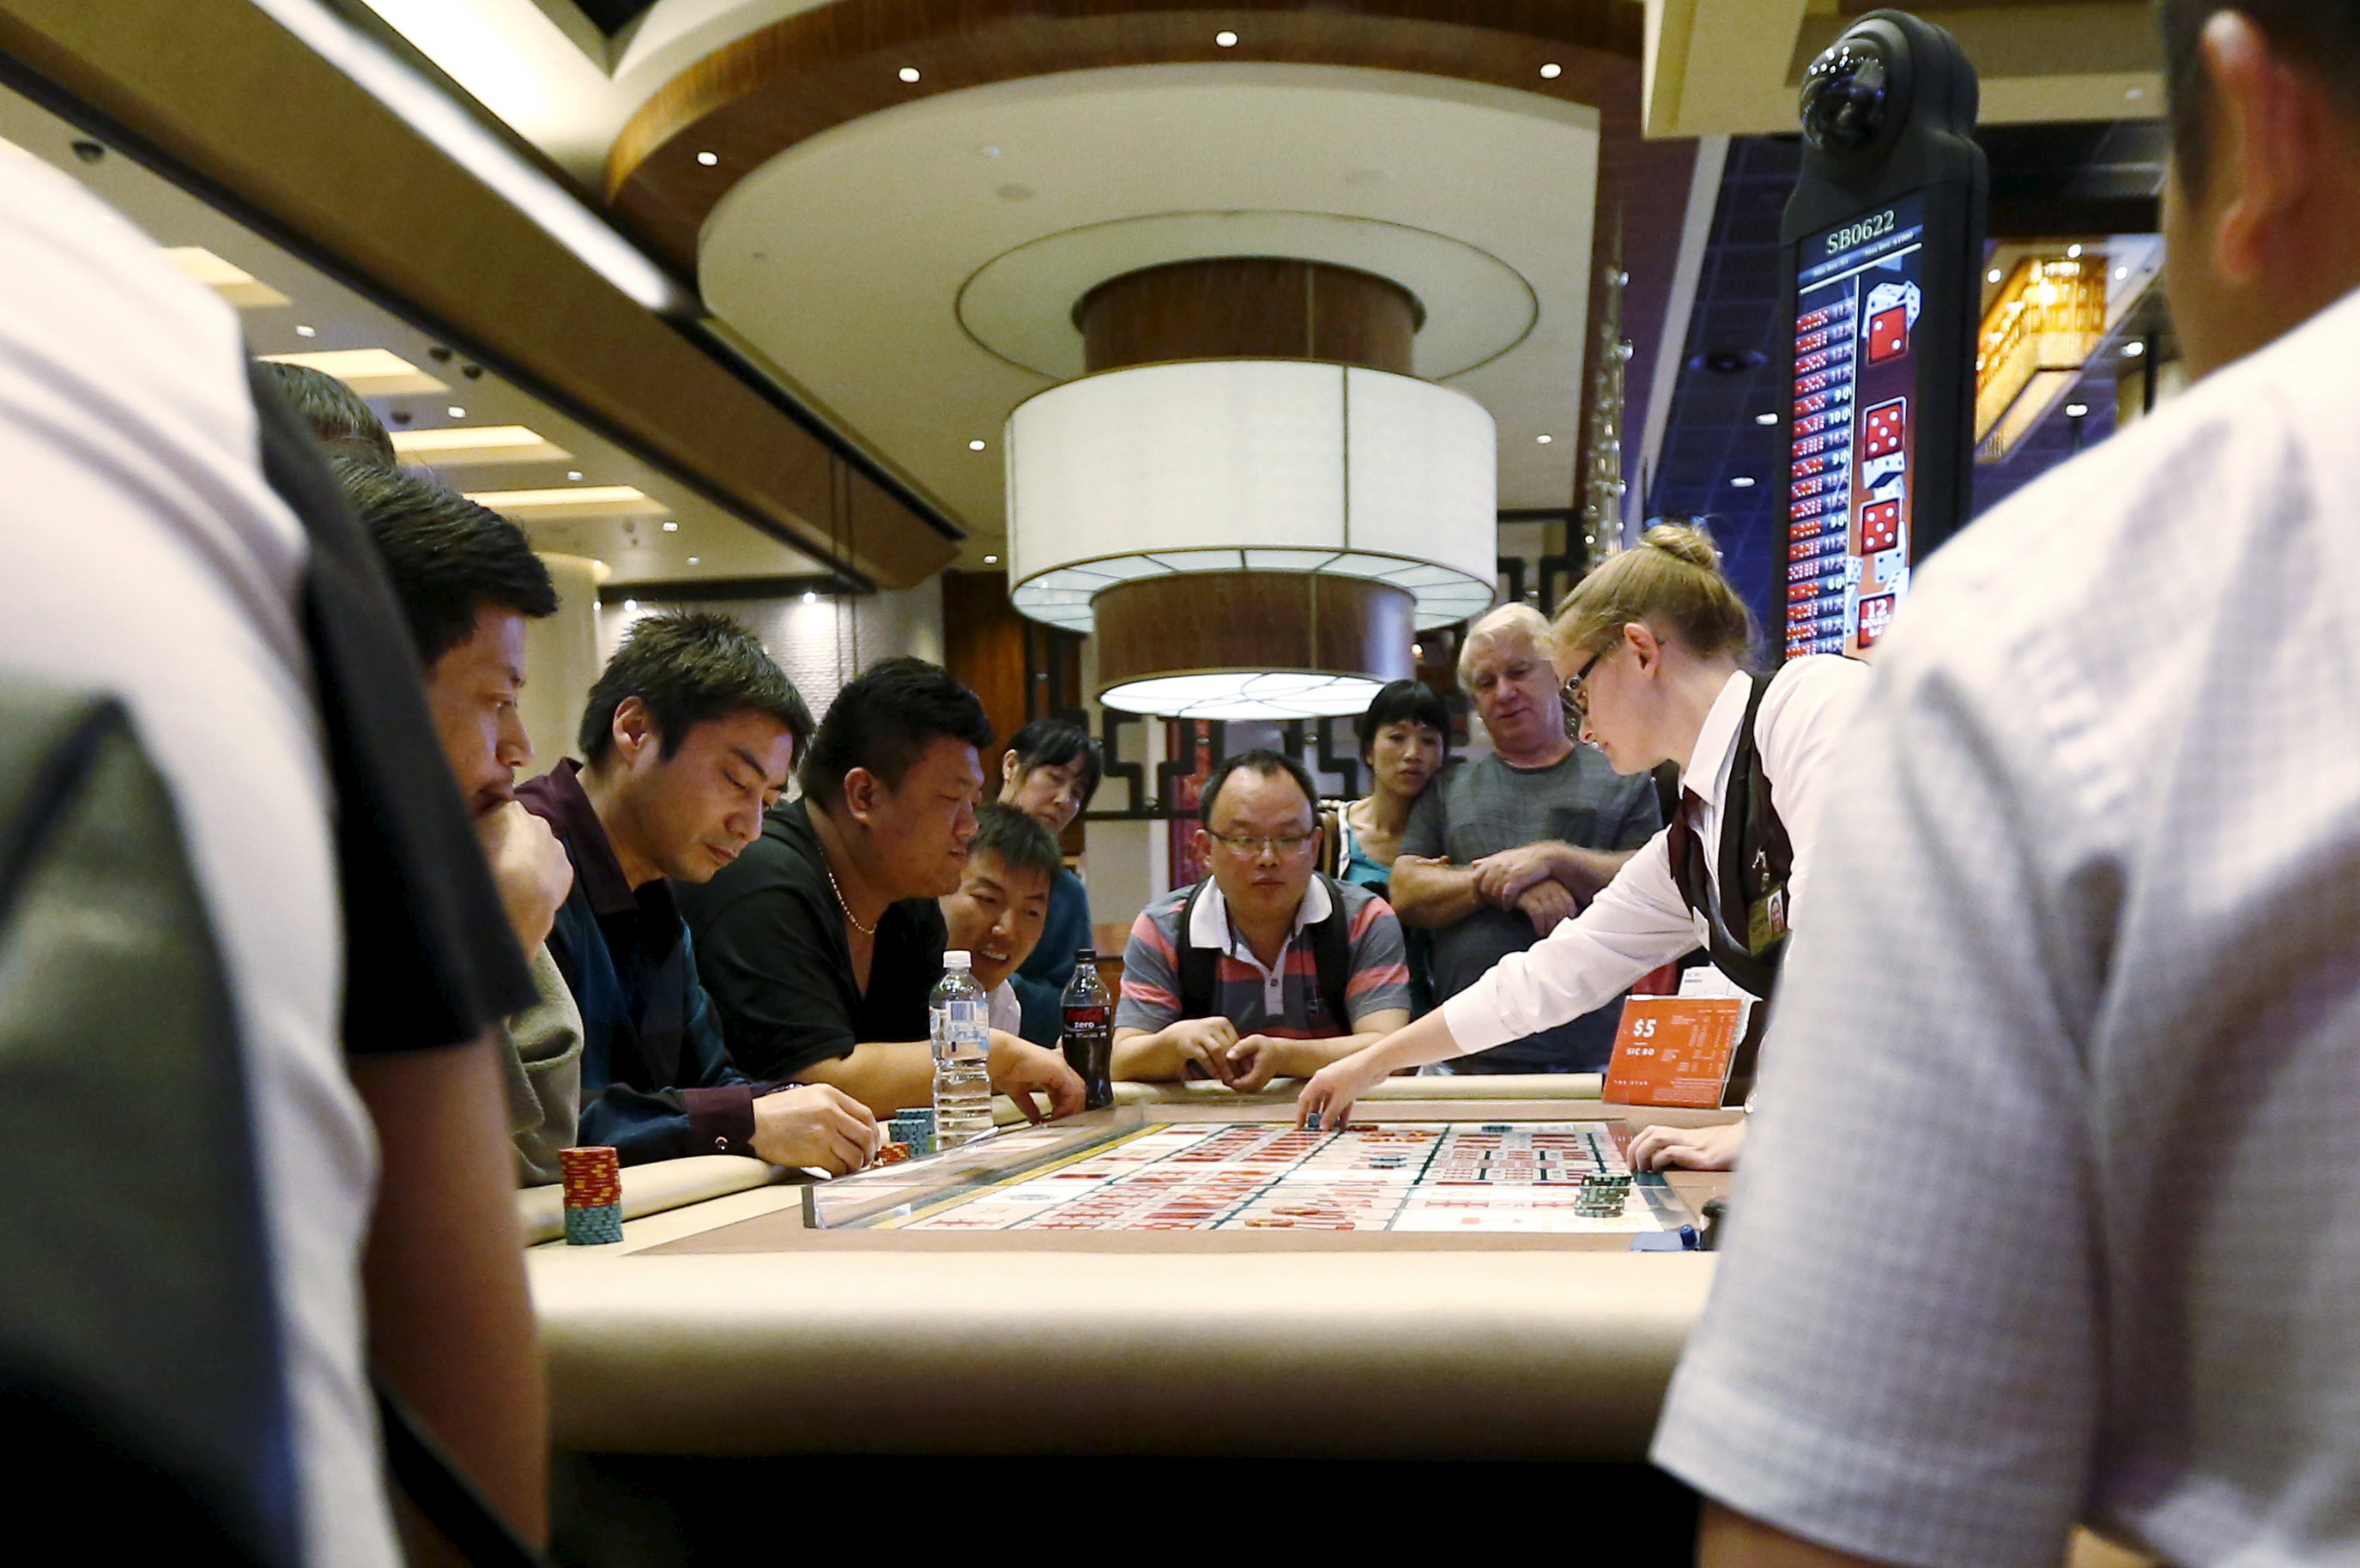 Visitors participate in a game at Sydney's Star Casino